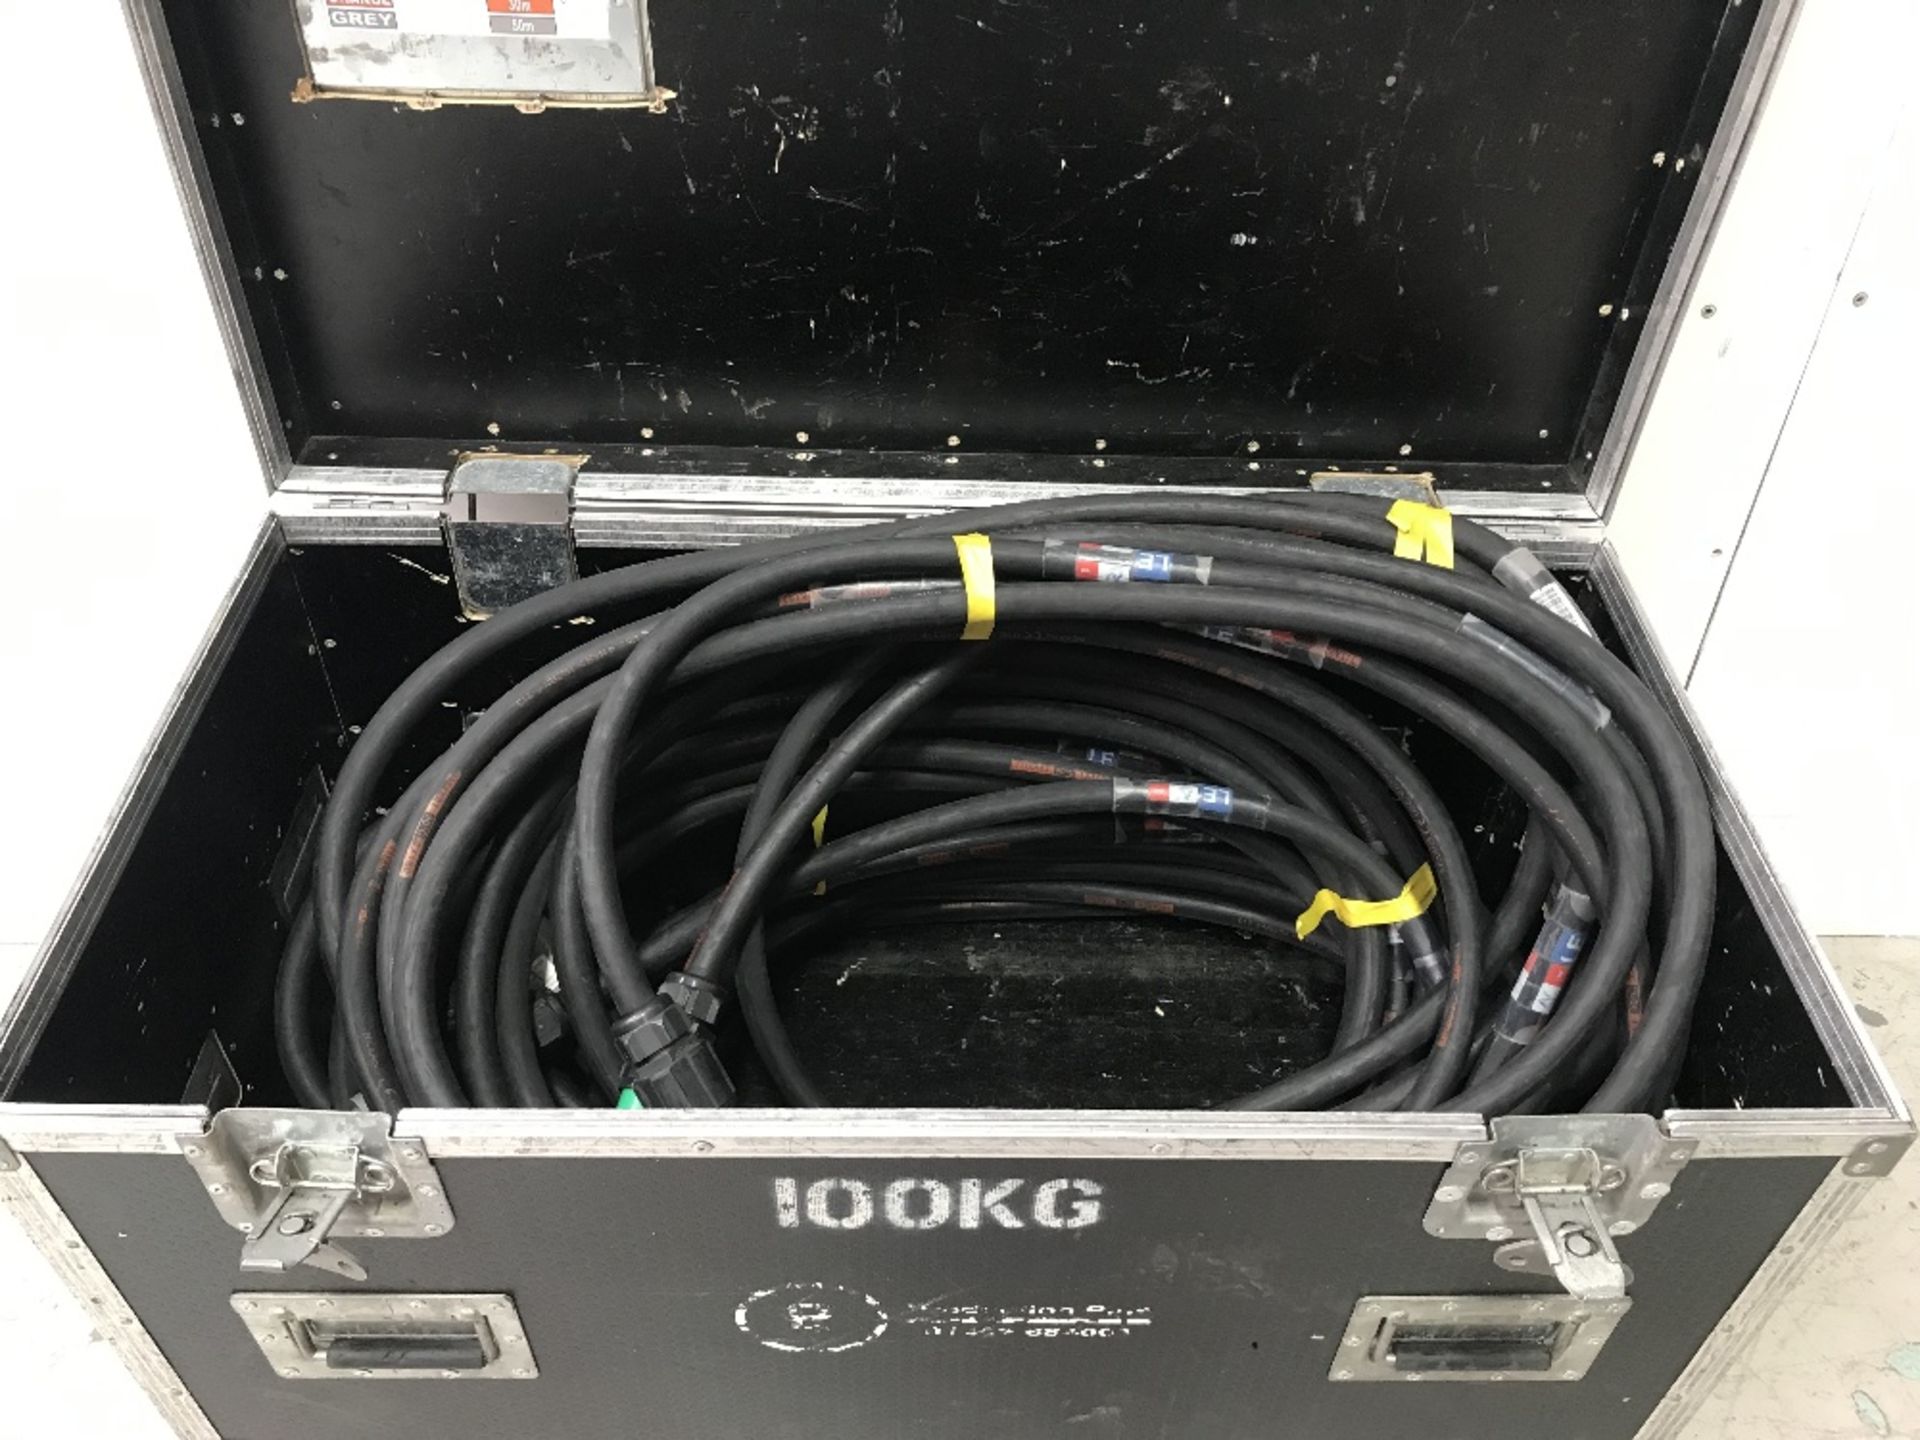 Euro Tour Grade 4ft Mobile Cable Trunk With Contents 10m Powerlock Cable